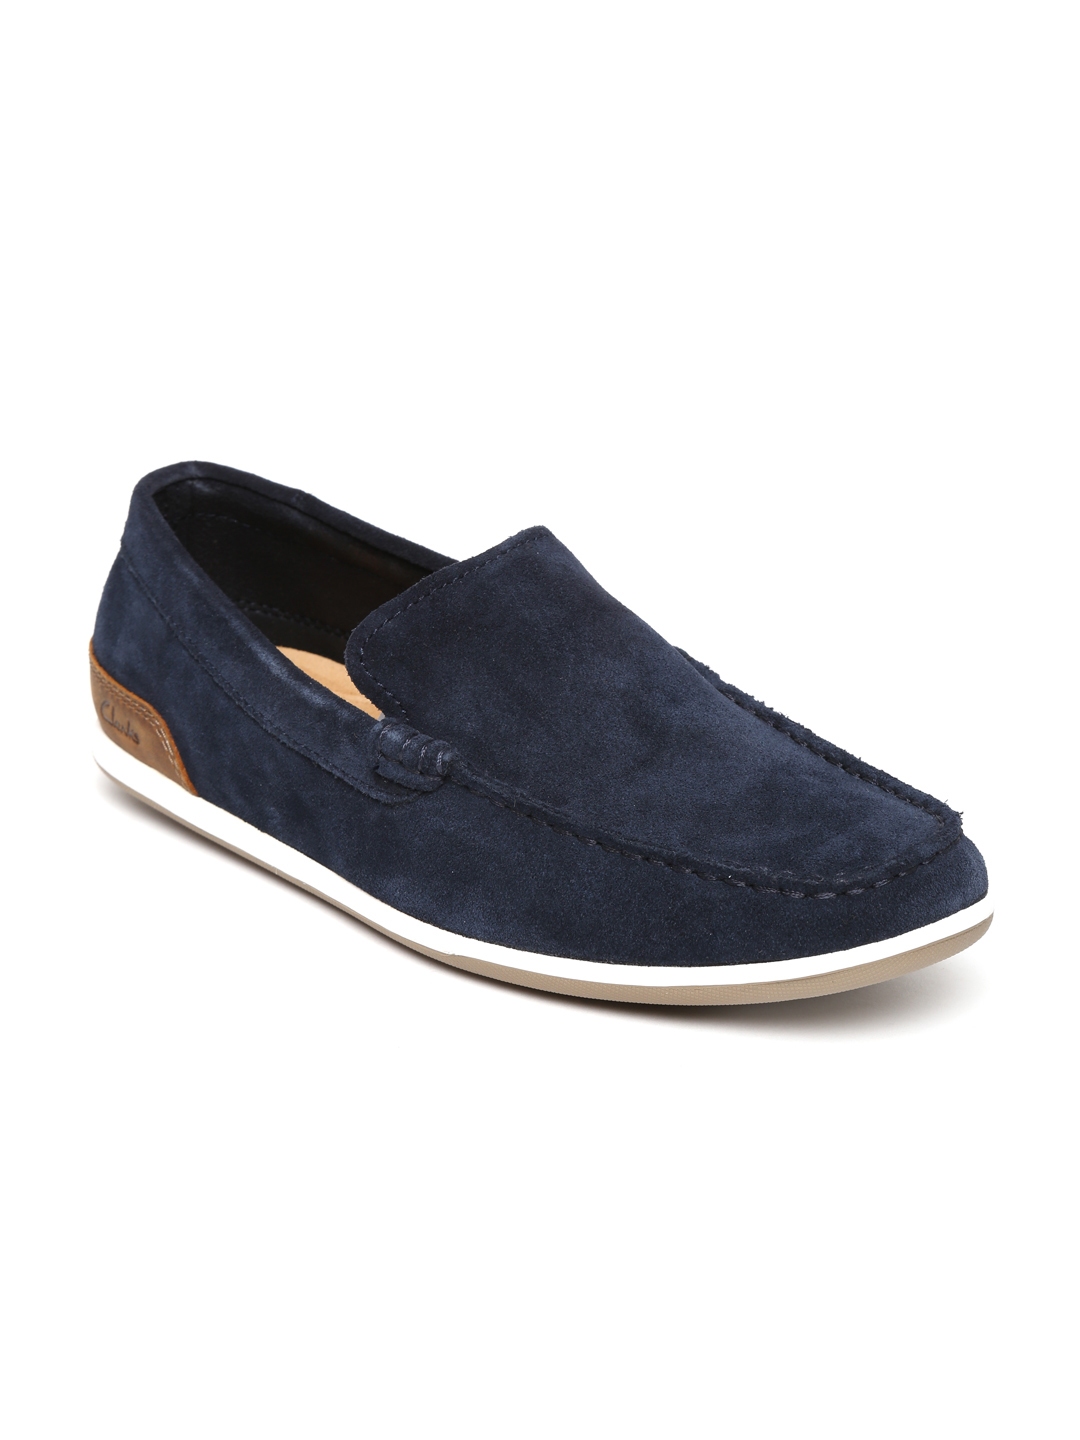 Buy Clarks Men Navy Blue Suede Loafers - Casual Shoes for Men 391417 ...